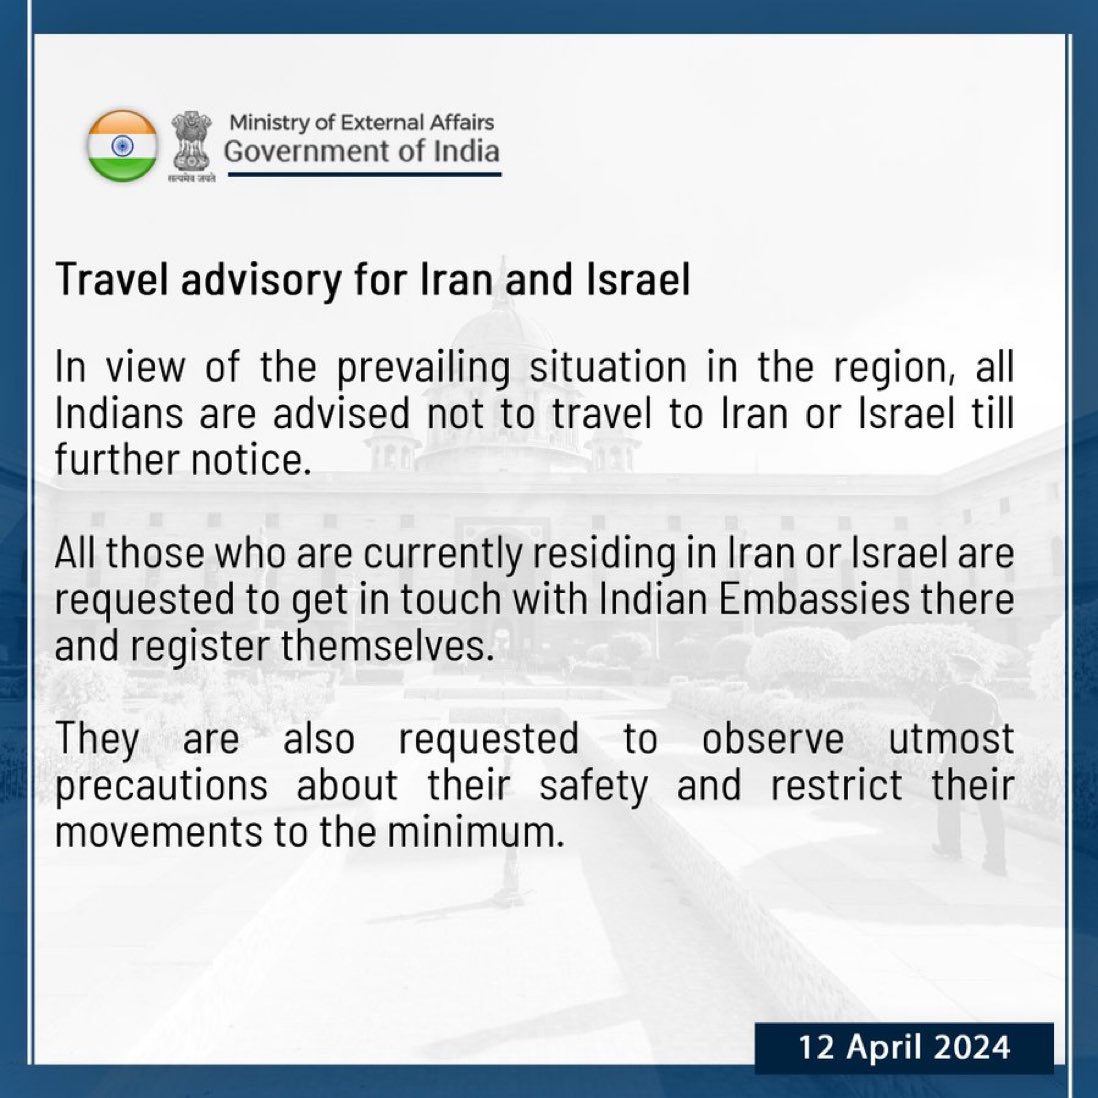 #US officials warns of #Iranian attack on #Israel! External Affairs Ministry issues travel advisory asking #Indians not to travel to #Iran or #Israel in view of prevailing situation in the region.